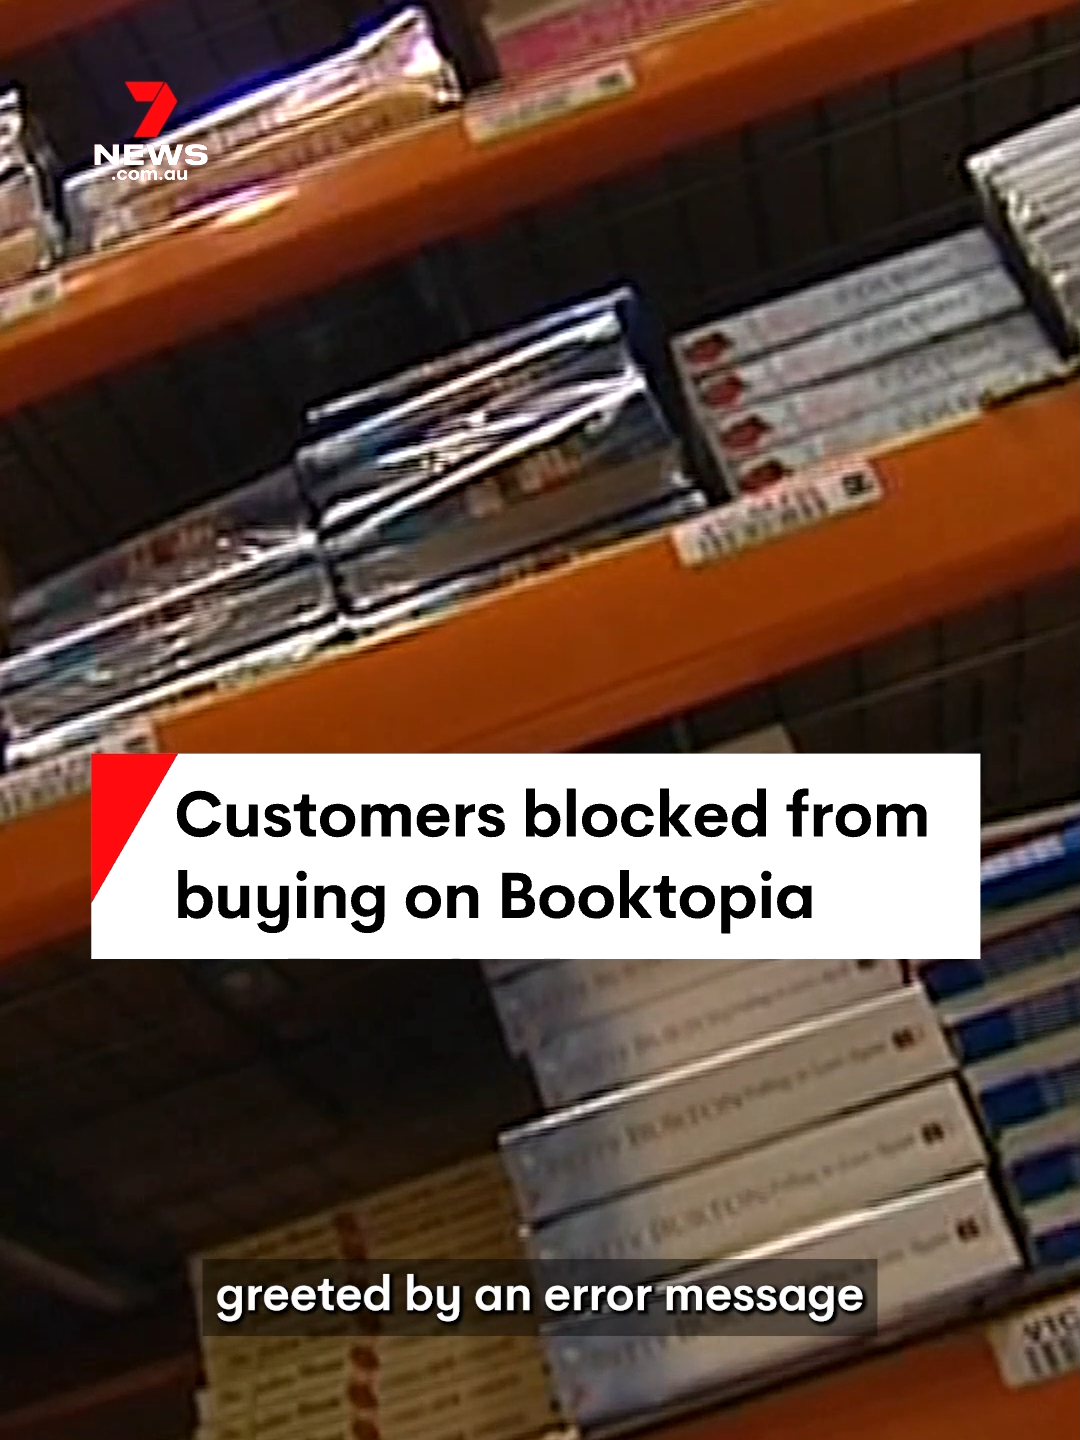 Booktopia is no longer taking online orders after going into administration. #booktopia #books #bookshop #bookstore #reading #onlineshopping #7NEWS